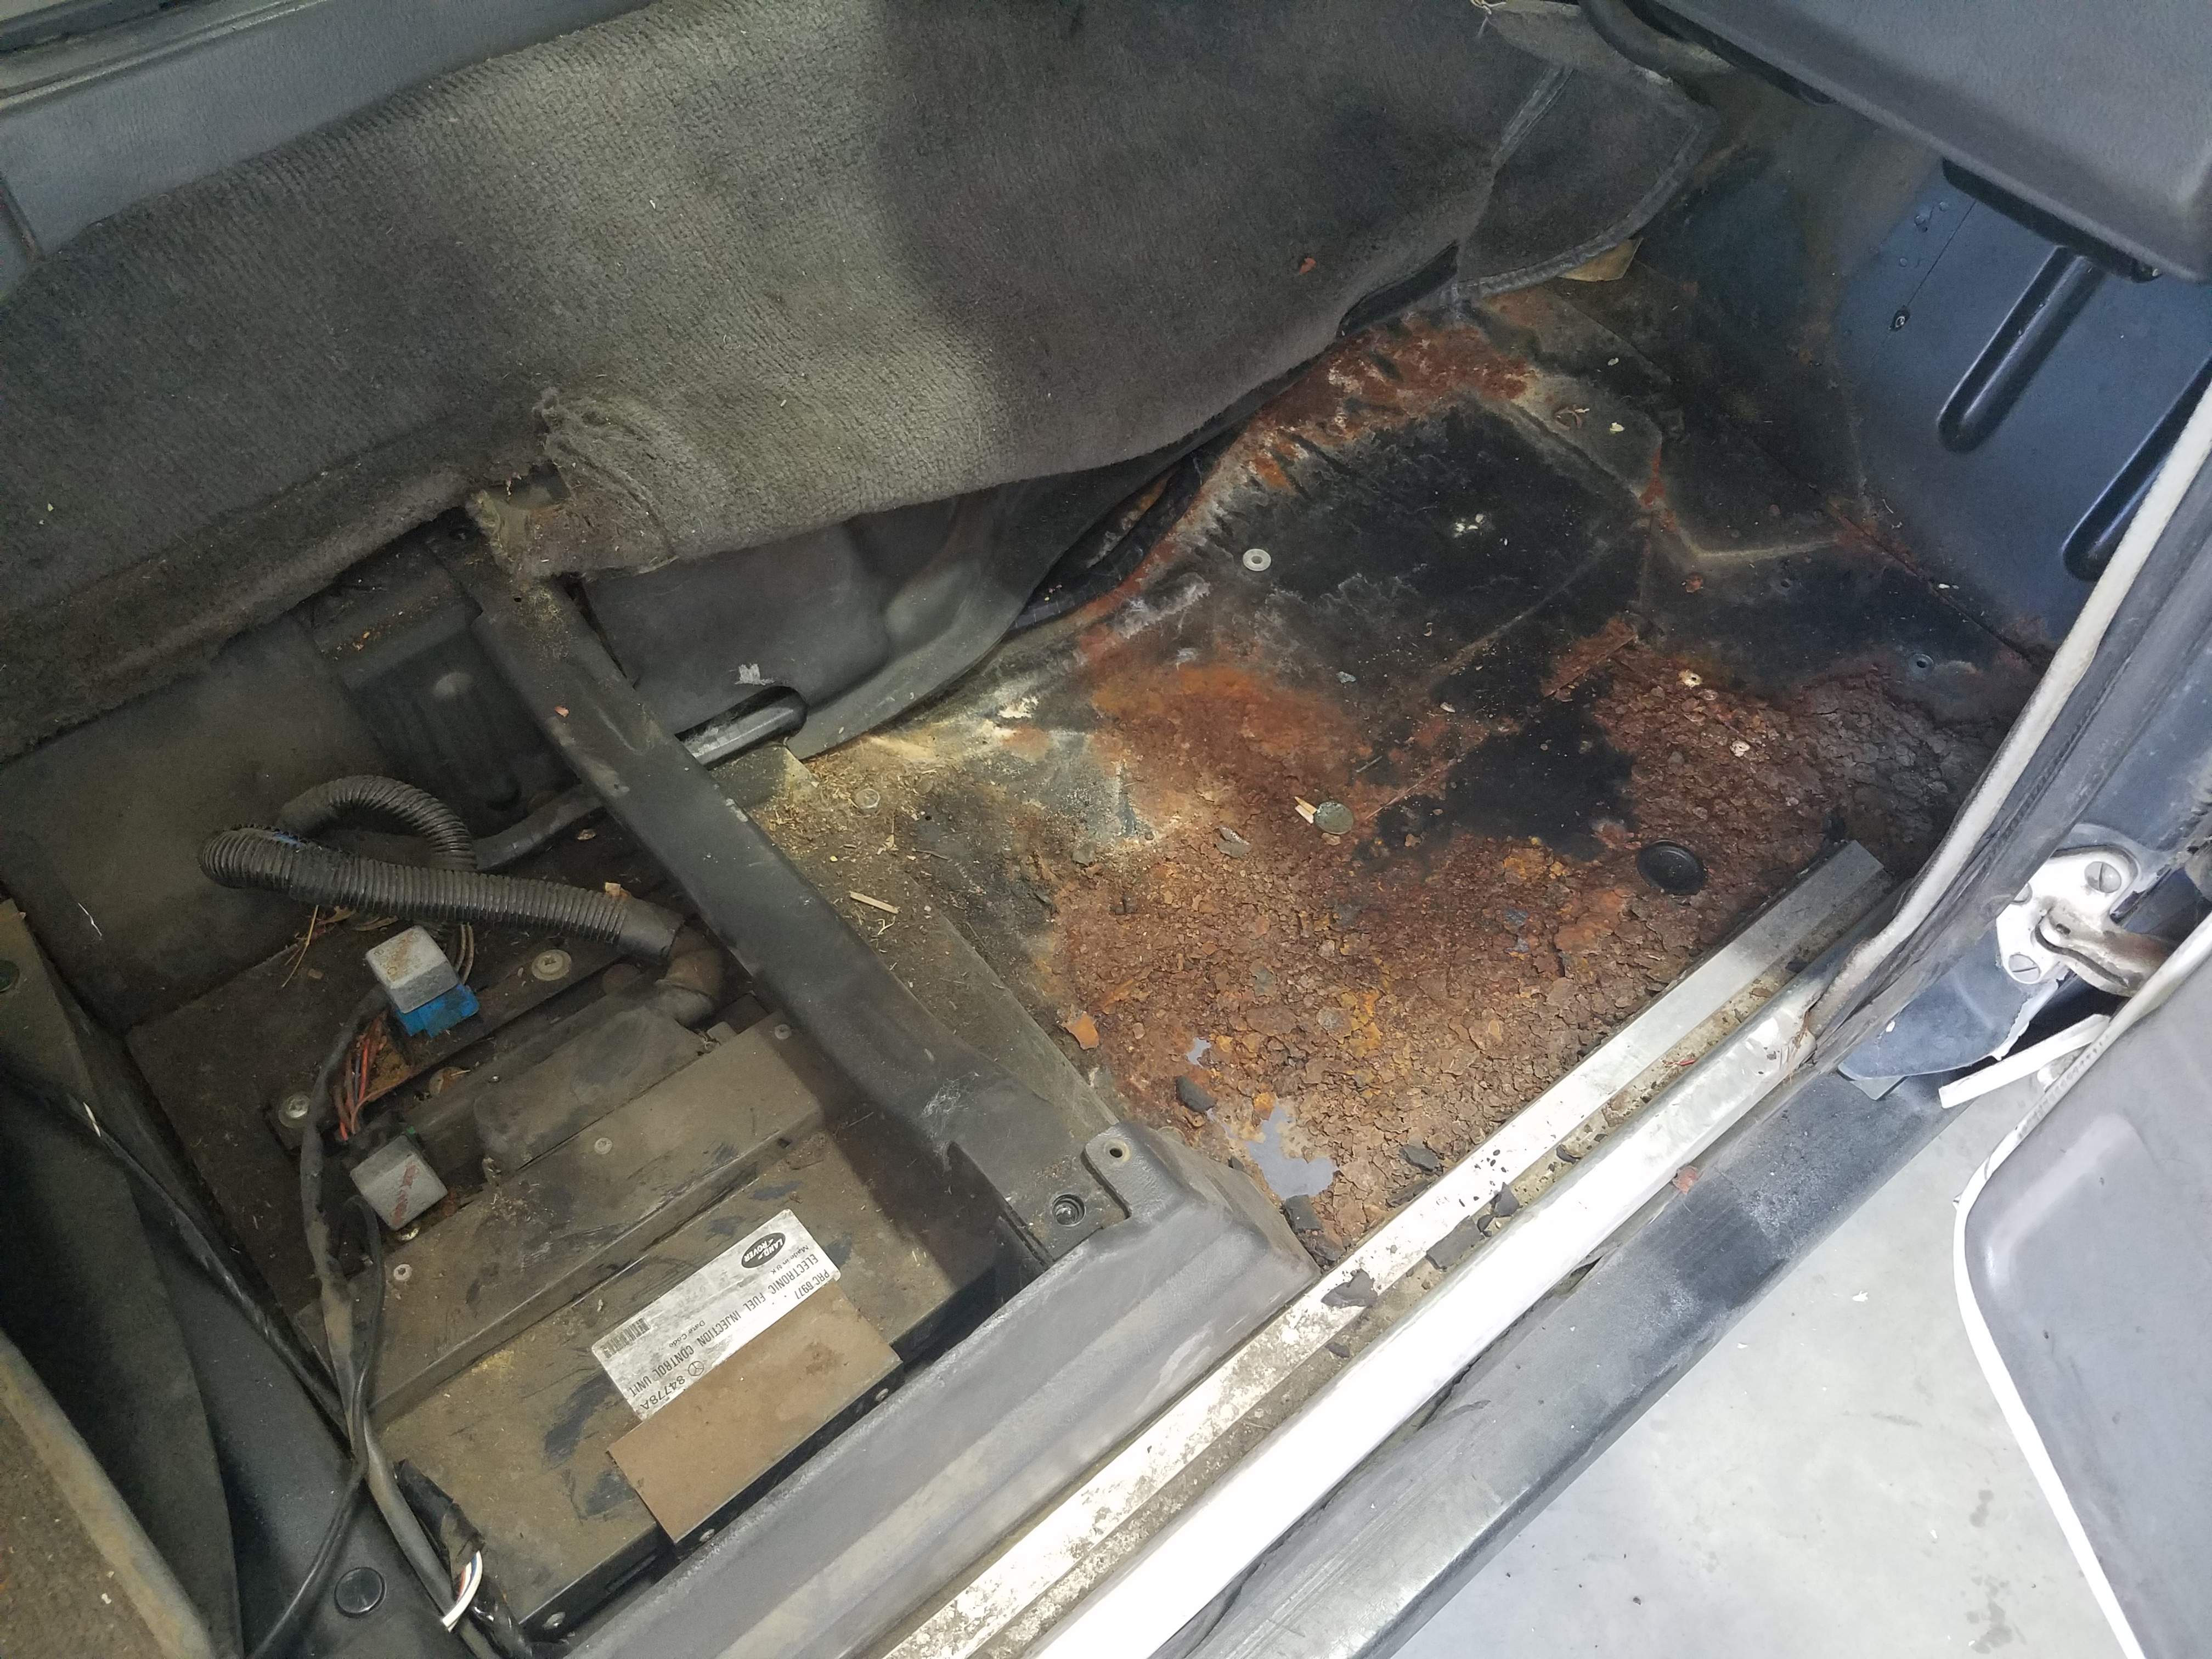 1988 Range Rover - Floor Pans - Land Rover Forums - Land Rover ...